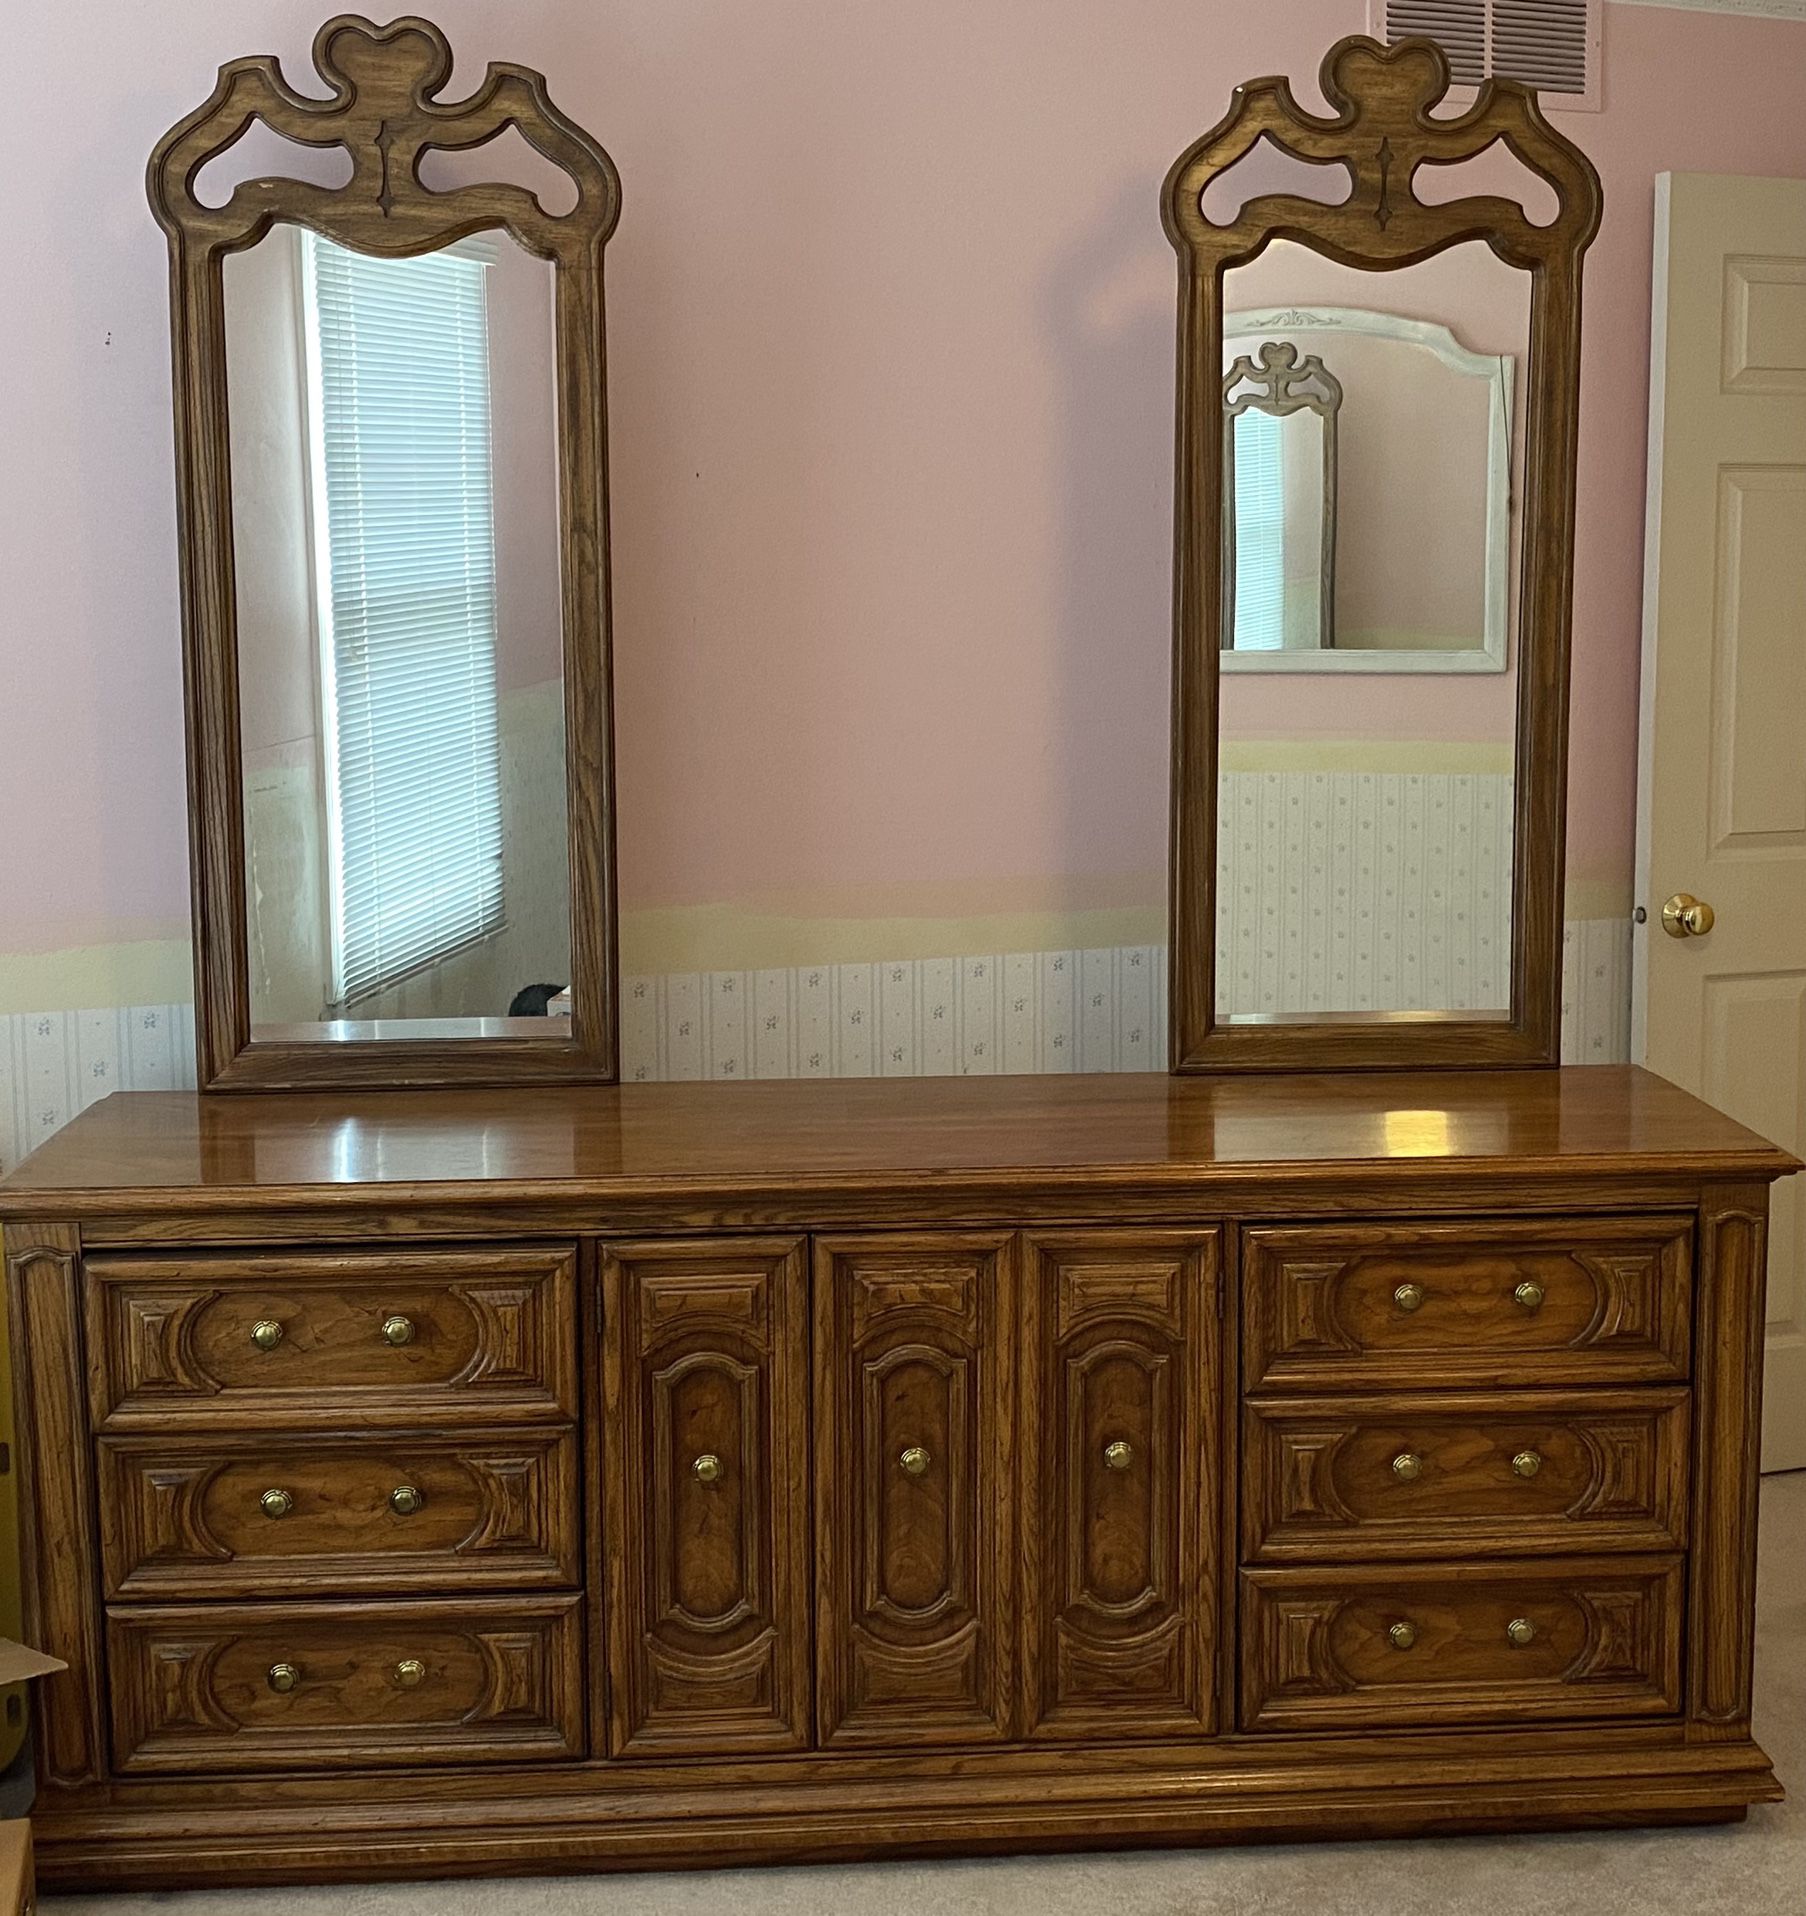 Good Quality Dresser With Mirrors, Lots Of Drawer Space! Matching Nightstand. 